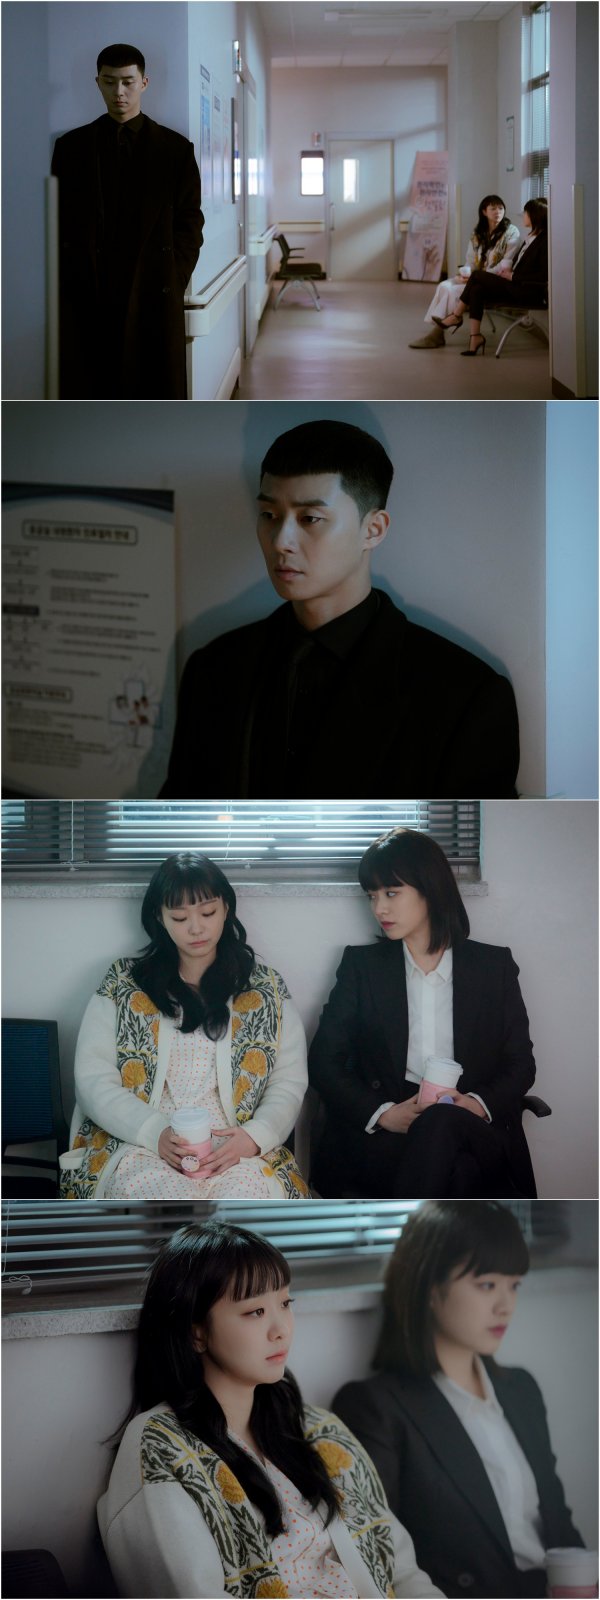 Arousal of Park Seo-joon beginsJTBCs production team of Itaewon Klath (director Kim Sung-yoon, playwright Cho Kwang-jin) unveiled the image of Park Sae-ro-yi (Park Seo-joon), who listens to the conversation between Joy Seo (Kim Da-mi) and Ma Hyun-yi (Lee Joo-young) at a distance on the 14th, ahead of the 14th broadcast.In the last broadcast, four years have passed and the hot rebellion of Park Sae-ro-yi, still in progress, has been drawn.The single night, which grew from Itaewons small fortifications to Inc. I.C., was now closely following the peak of the catering industry.But Park Sae-ro-yi, who learned that Jang Dae-hee (Yoo Jae-myung) was sentenced to cancer before the last counterattack, said, You should be punished by me.Dont die yet, he said, pledging his last revenge. Park Sae-ro-yi, who is promising a reunion soon, and Changs cool eyes gave overwhelming tension.In the meantime, the affectionate distance between Park Sae-ro-yi and Joy in the public photos stimulates curiosity.Joyser and Ma Hyun-yi, who are more emaciated than before, are talking in the hospital hallway. Park Sae-ro-yis eyes, which hear the stories of the two at a distance, are very different.In the previous preview video, Joys Confessions, I have to be the person I need for the representative, raises the sadness, while raising expectations by suggesting changes to Park Sae-ro-yis Arousal, which is confused by feelings toward her.Attention is focusing on whether Joys four-year One-sided love can lead to bilateral romance.In the 14th episode, which airs on the 14th, Joys straight line continues.Joys heartfelt I love you Confessions begins to permeate slowly and deeply to Park Sae-ro-yi.On the other hand, Joy, who was overly clinging to the work of Inc. I.C to become a necessary person to Park Sae-ro-yi, falls overworked.The Arousal of Park Sae-ro-yi, who realized the mind late, will also be drawn together. I am looking forward to seeing if the hearts of the two people who have been mixed for a long time can finally reach.The stone-like mind of Park Sae-ro-yi, who was not stuck in Joys long-standing One-sided love and straight-line Confessions, begins to move slowly, said the production team of Itaewon Klath. I hope that the moment of changing and arousal will be added to my heart.